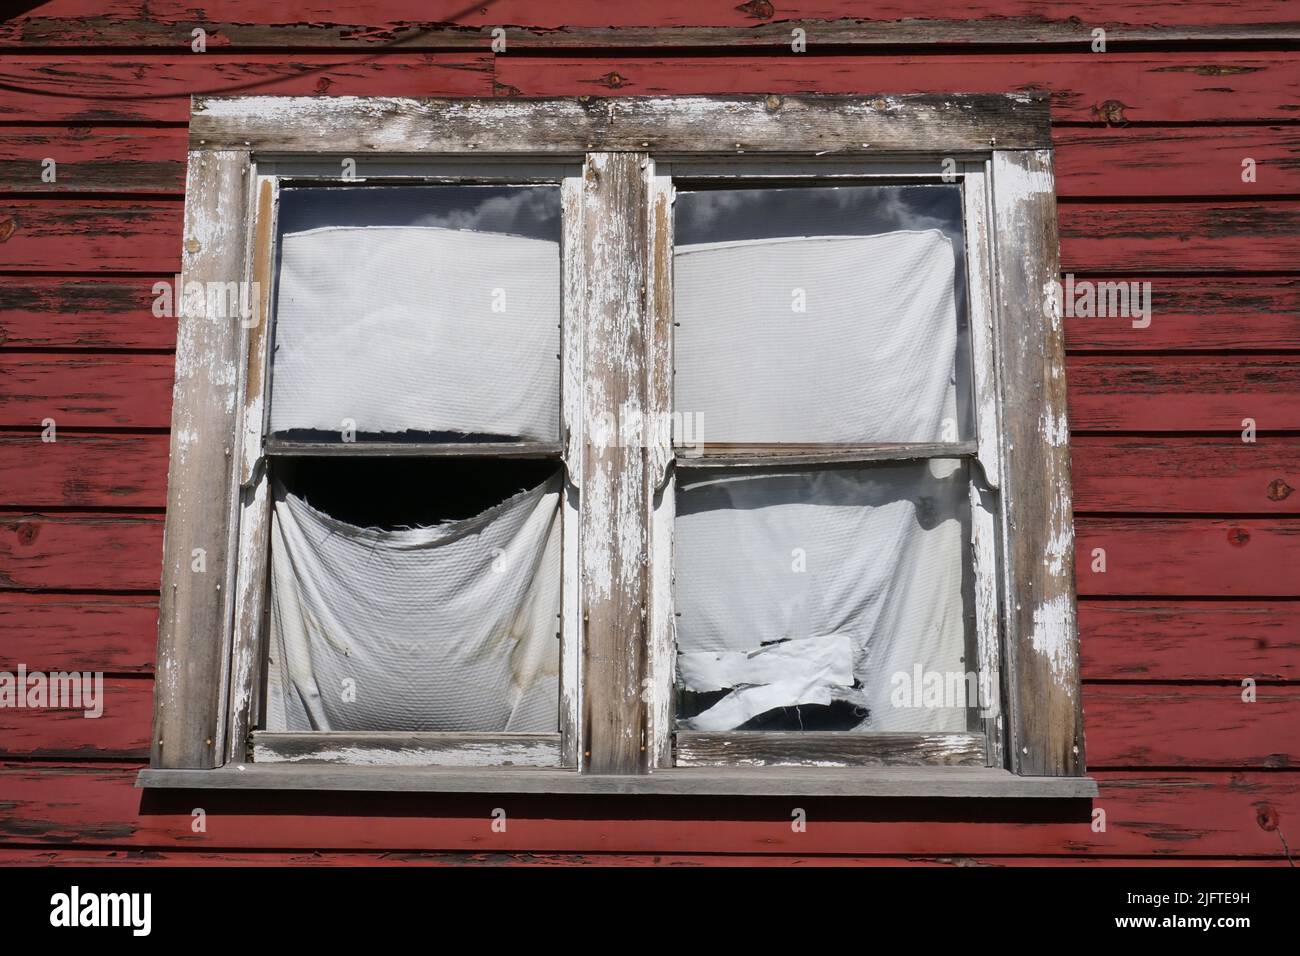 An old window with peeling paint Stock Photo